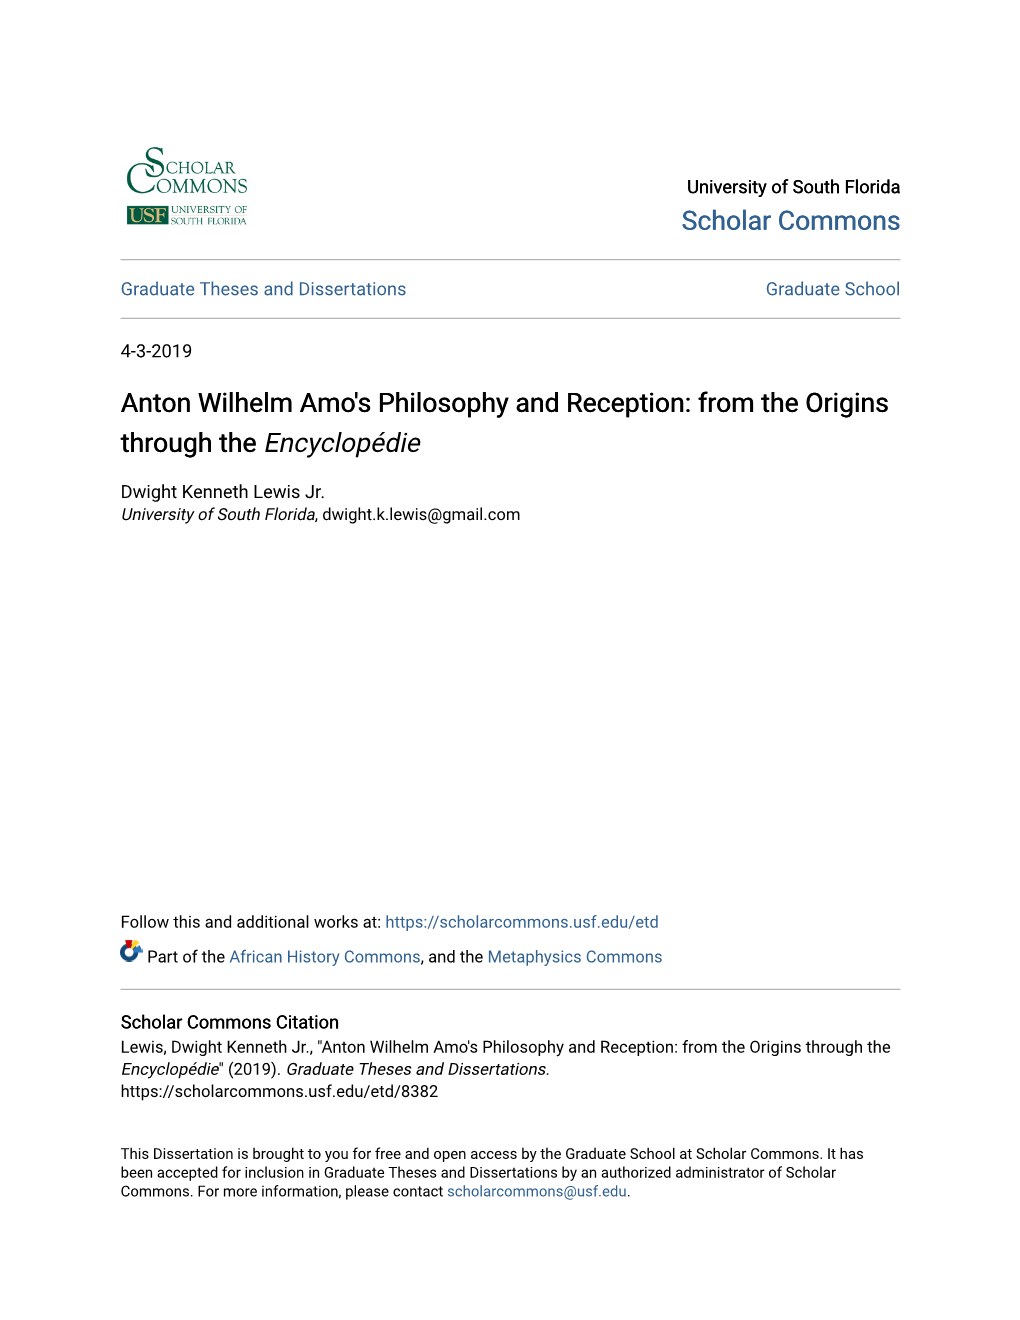 Anton Wilhelm Amo's Philosophy and Reception: from the Origins Through the Encyclopédie